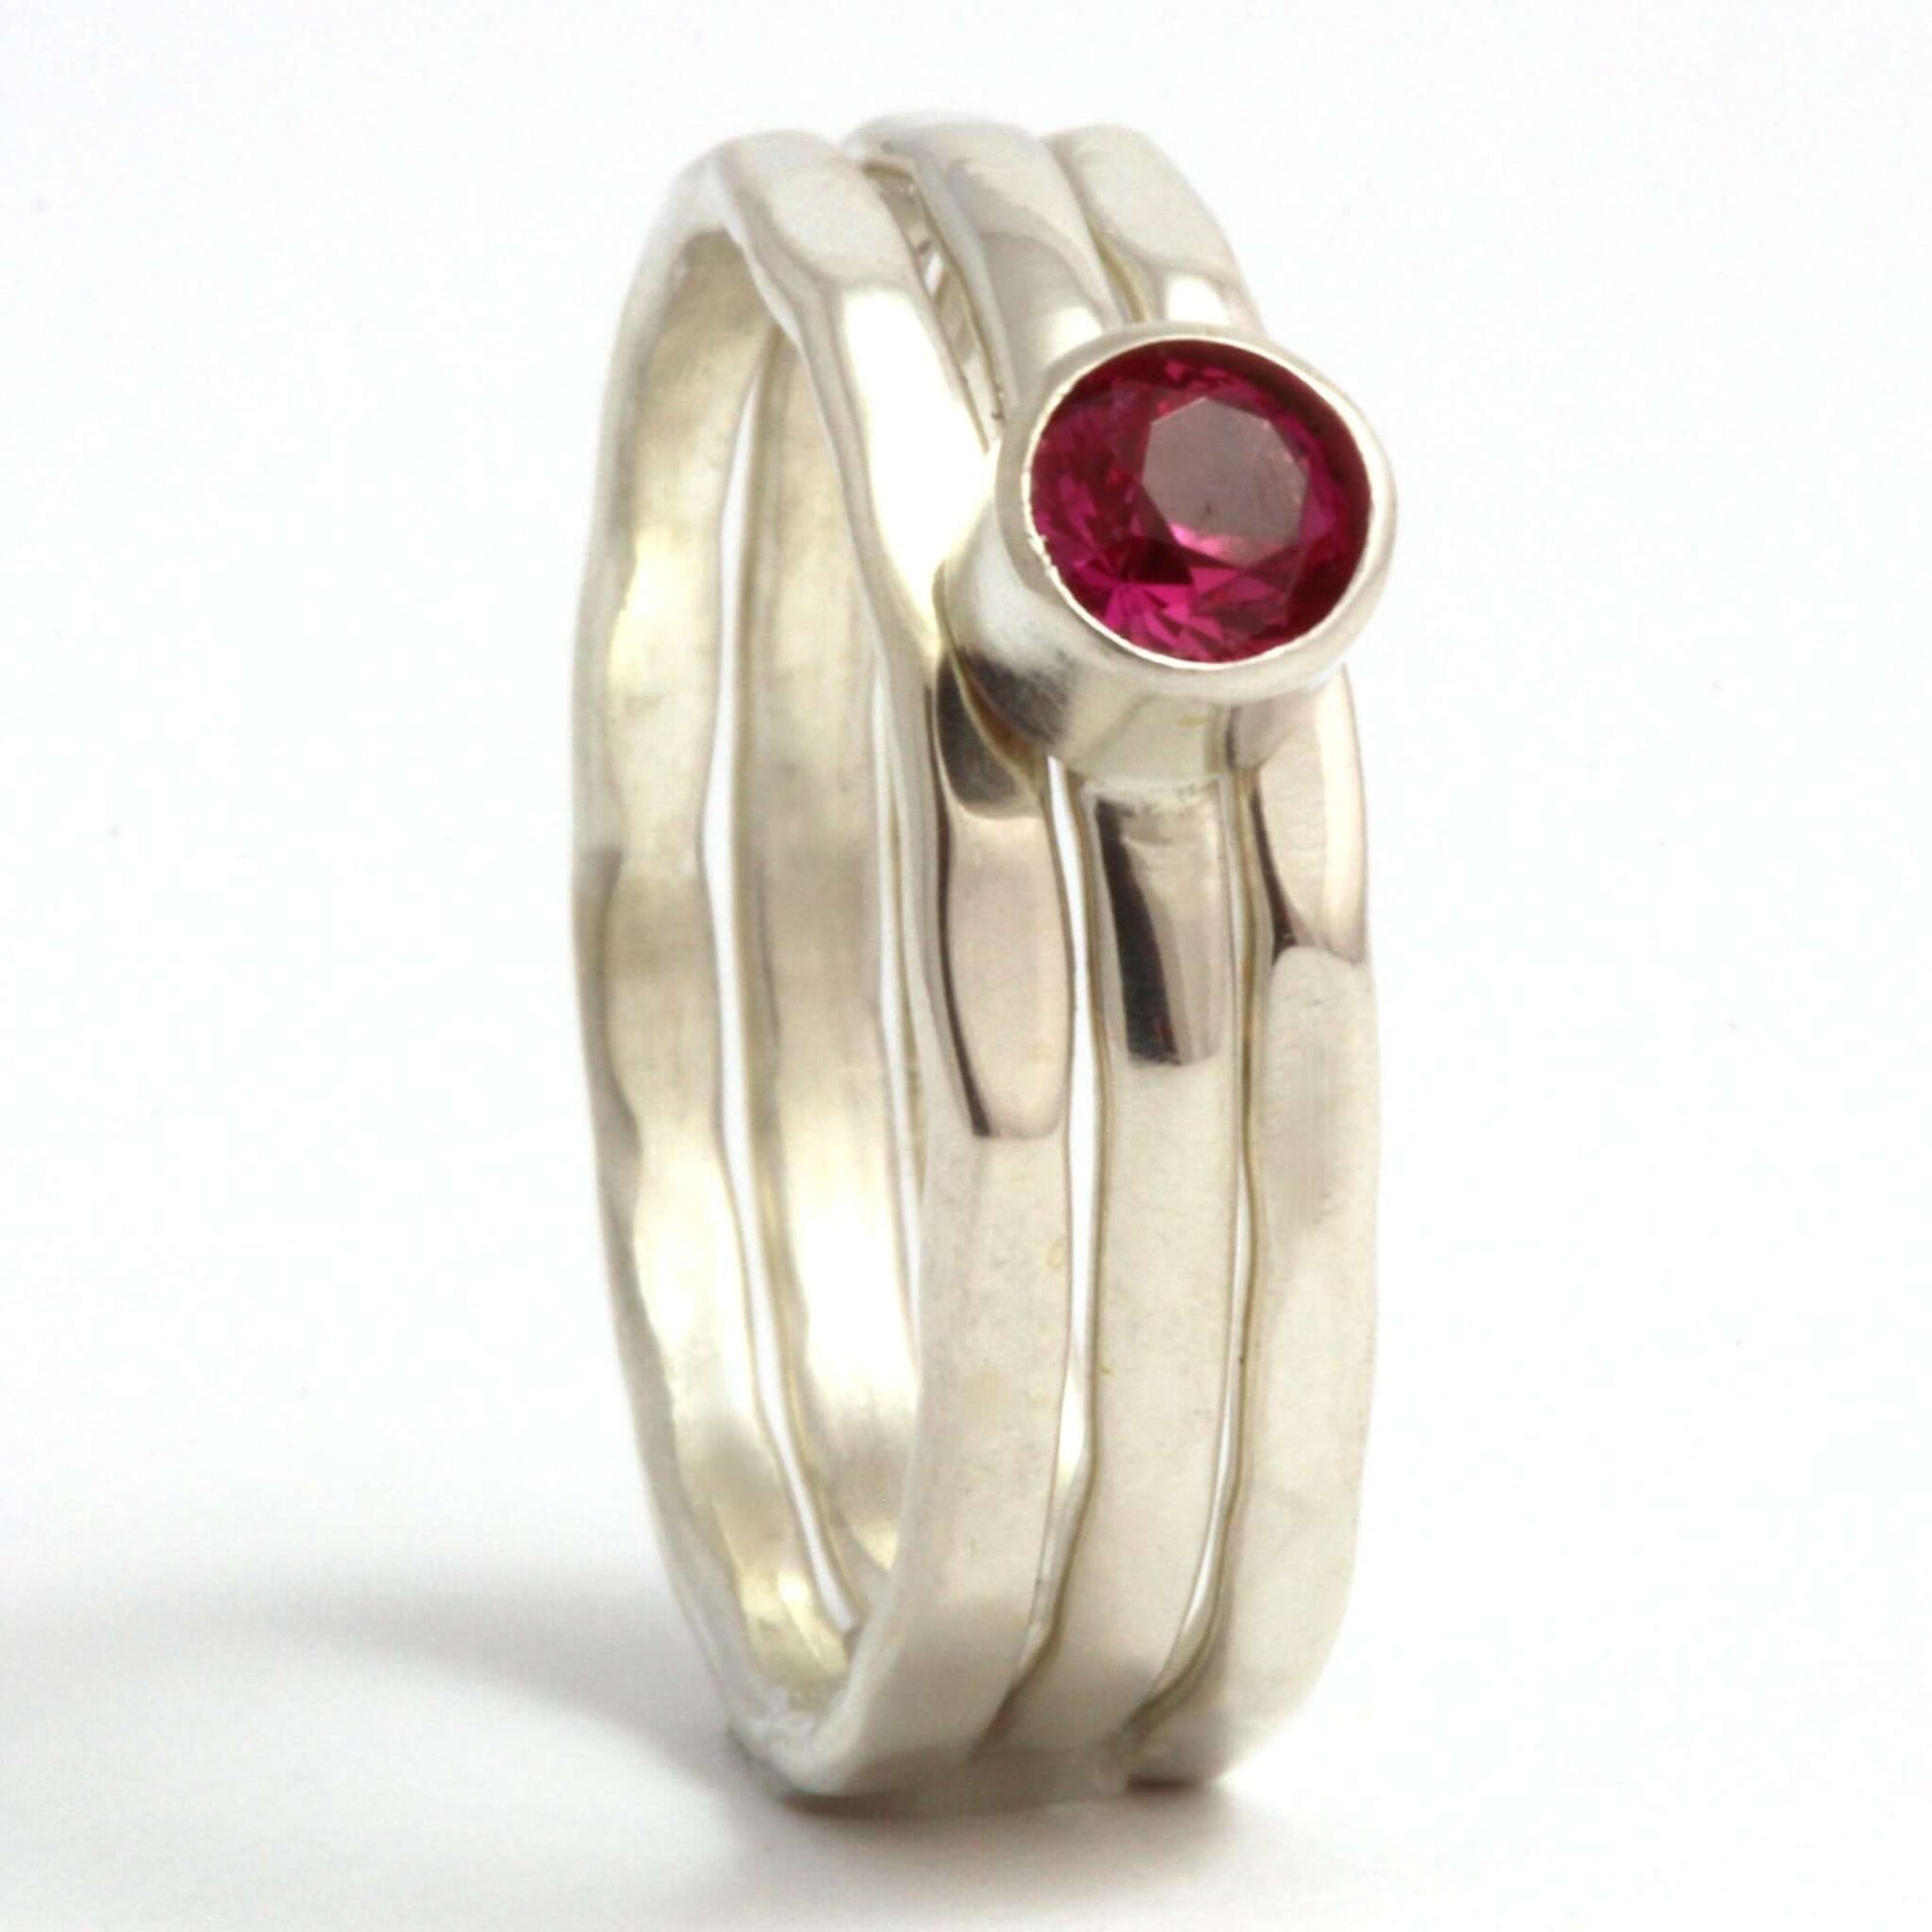 Set of Three Sterling Silver Stacking Rings with Lab Grown Ruby - Rebecca Cordingley